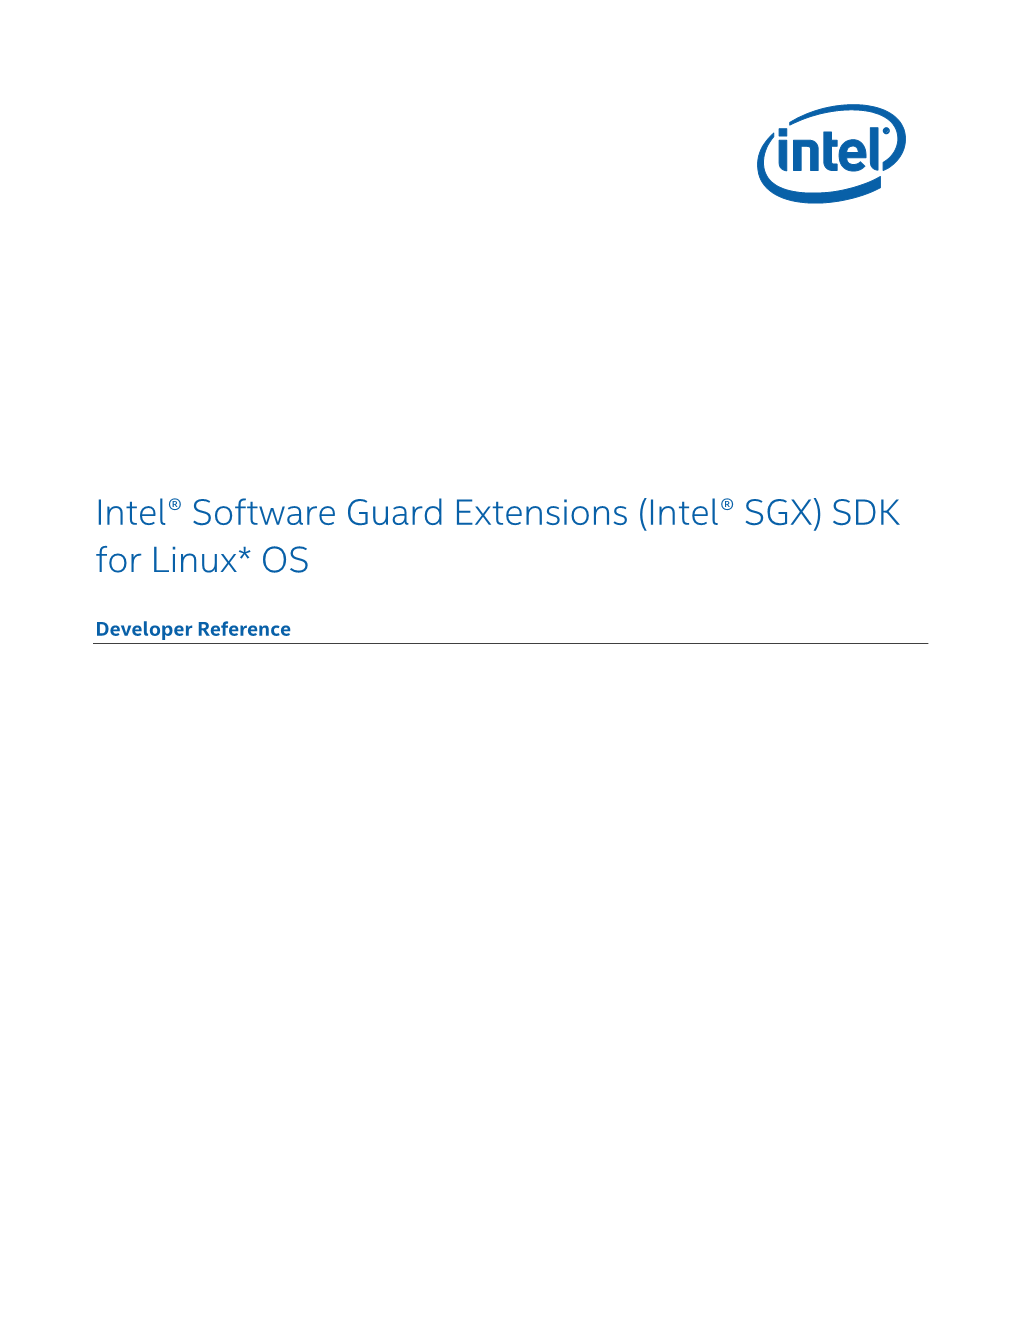 Intel® Software Guard Extensions (Intel® SGX) SDK for Linux* OS